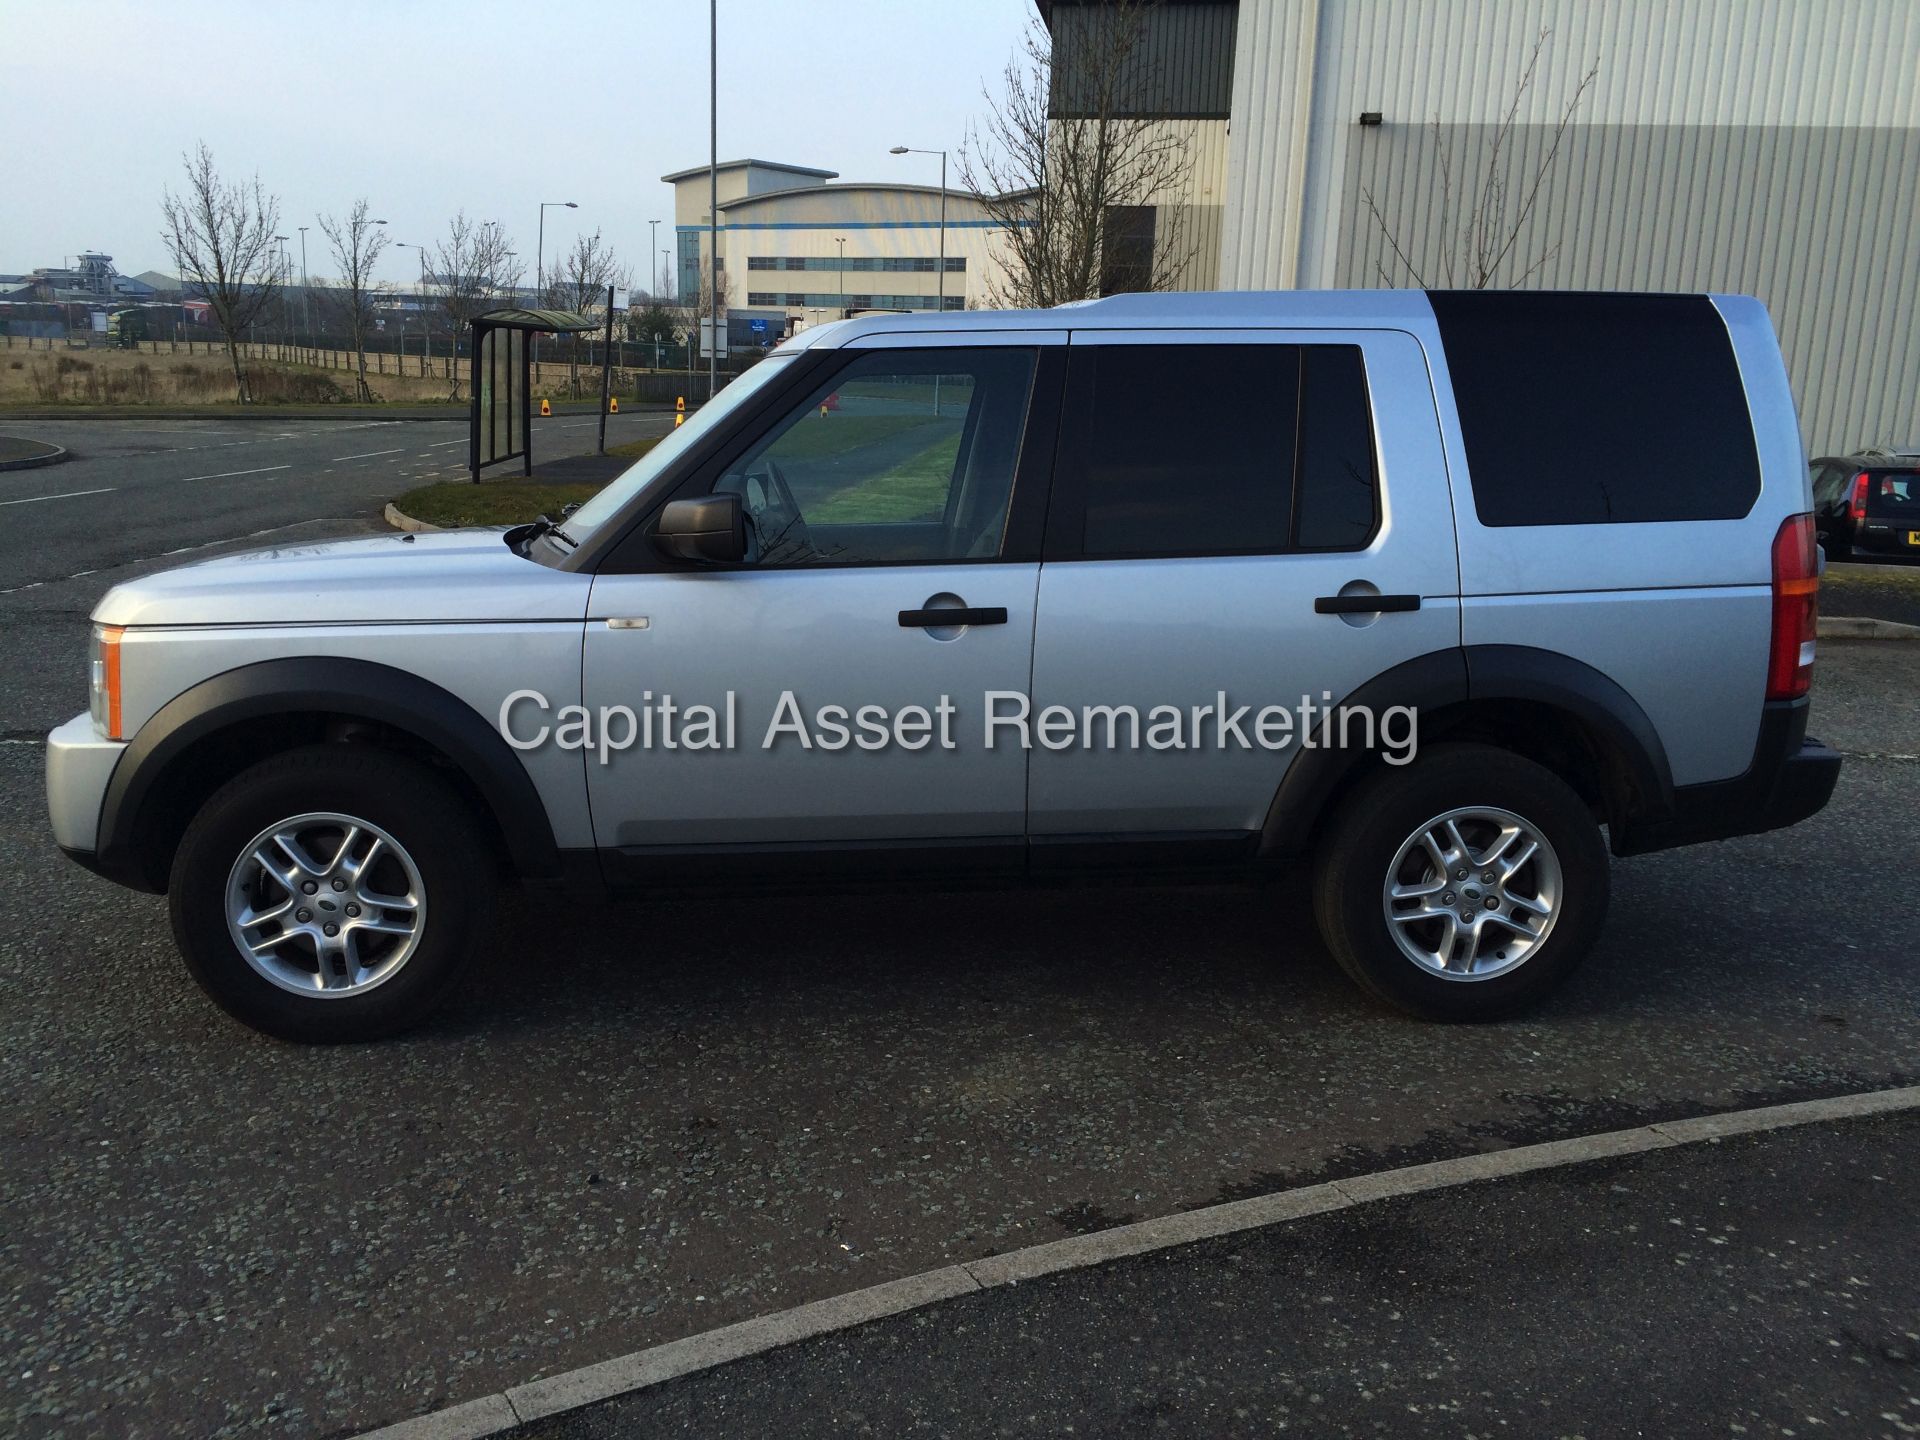 LANDROVER DISCOVERY 3 "TDV6" AUTOMATIC - 1 PREVIOUS OWNER FROM NEW - AIR SUSPENSION - PRIVACY GLASS! - Image 2 of 18